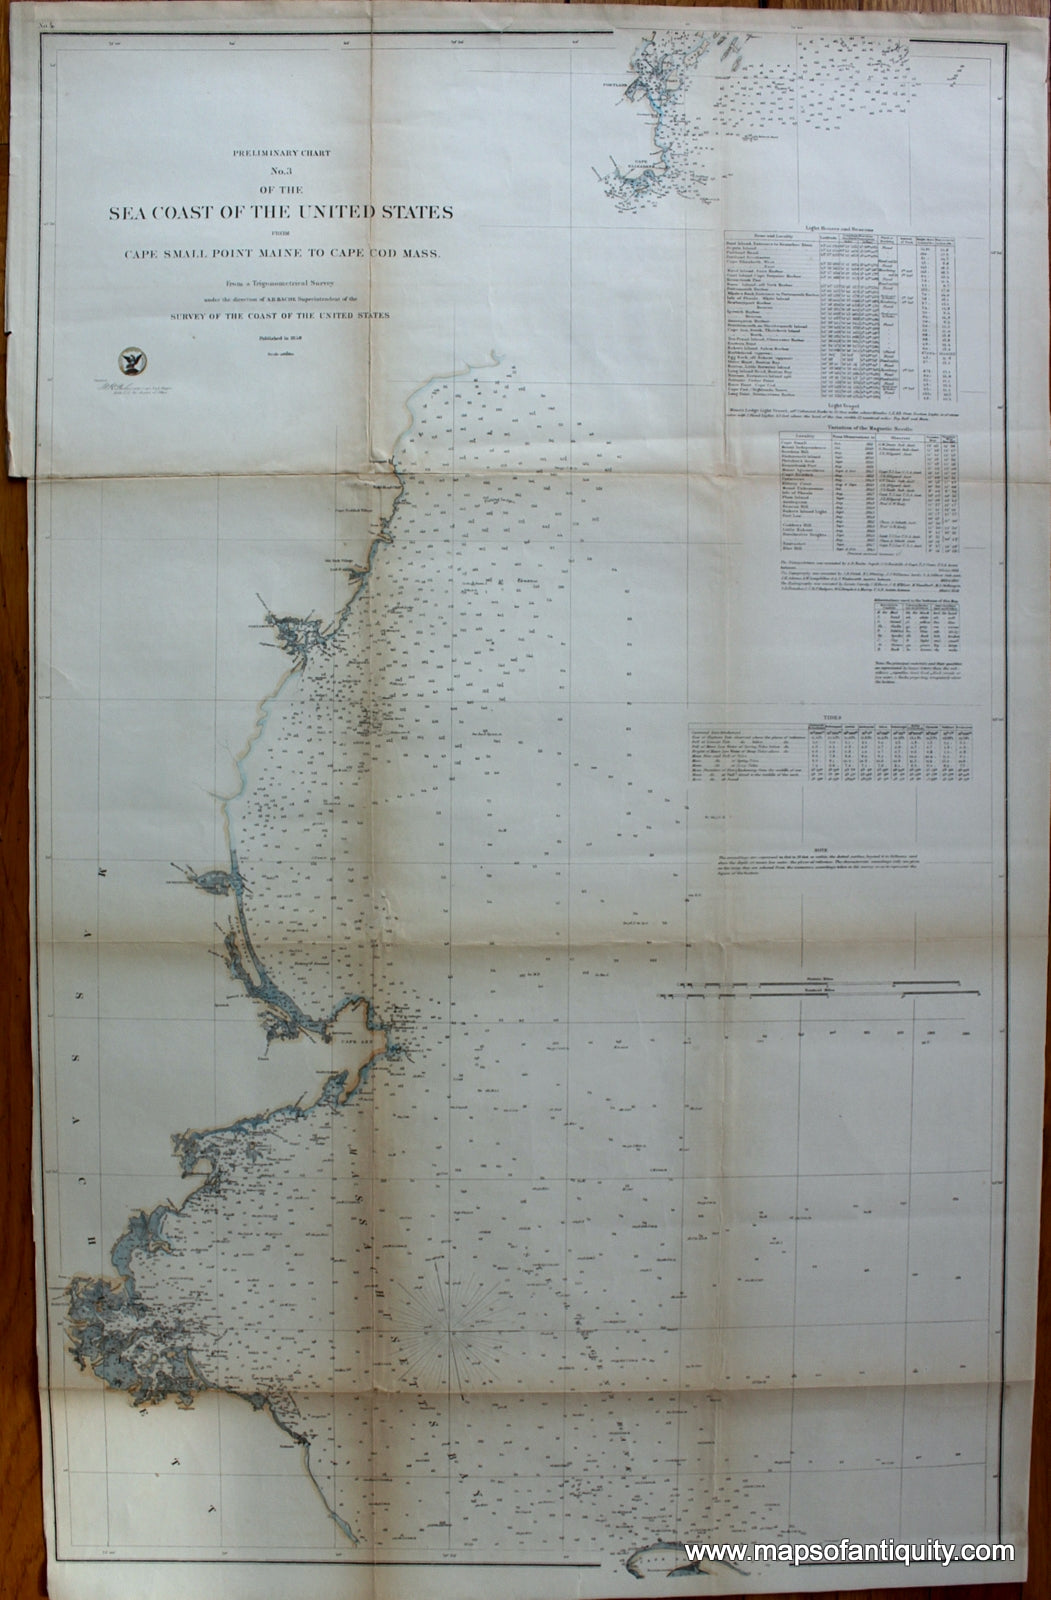 Antique-Nautical-Chart-Preliminary-Chart-No.-3-Sea-Coast-of-the-United-States-from-Cape-Small-Point-Maine-to-Cape-Cod-Mass.-United-States-New-England-1858-U.S.-Coast-Survey-Maps-Of-Antiquity